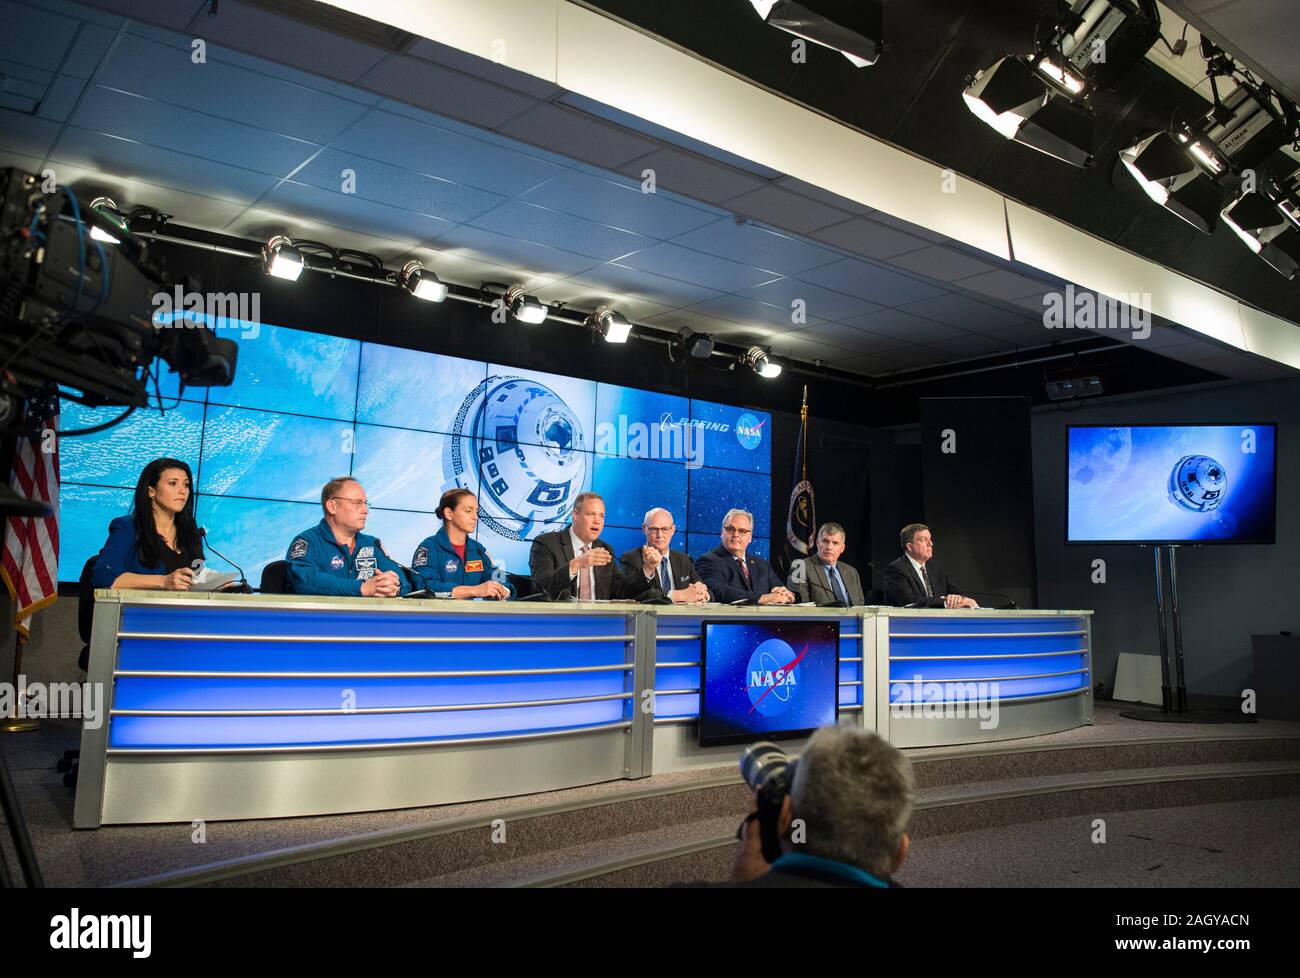 NASA and Boeing officials during a press conference following the launch of Boeing Starliner spacecraft onboard a United Launch Alliance Atlas V rocket at the Kennedy Space Center December 20, 2019 in Cape Canaveral, Florida. Sitting from left to right are: NASA Assoc. Adm for Communications Bettina Inclan, NASA astronauts Michael Fincke and Nicole Mann, NASA Administrator Jim Bridenstine, Tory Bruno, CEO of United Launch Alliance, Jim Chilton, senior vice president of Boeing Space and Launch Division, Steve Stich, Deputy Manager of NASA Commercial Crew Program, and NASA ISS Program Manager Ki Stock Photo